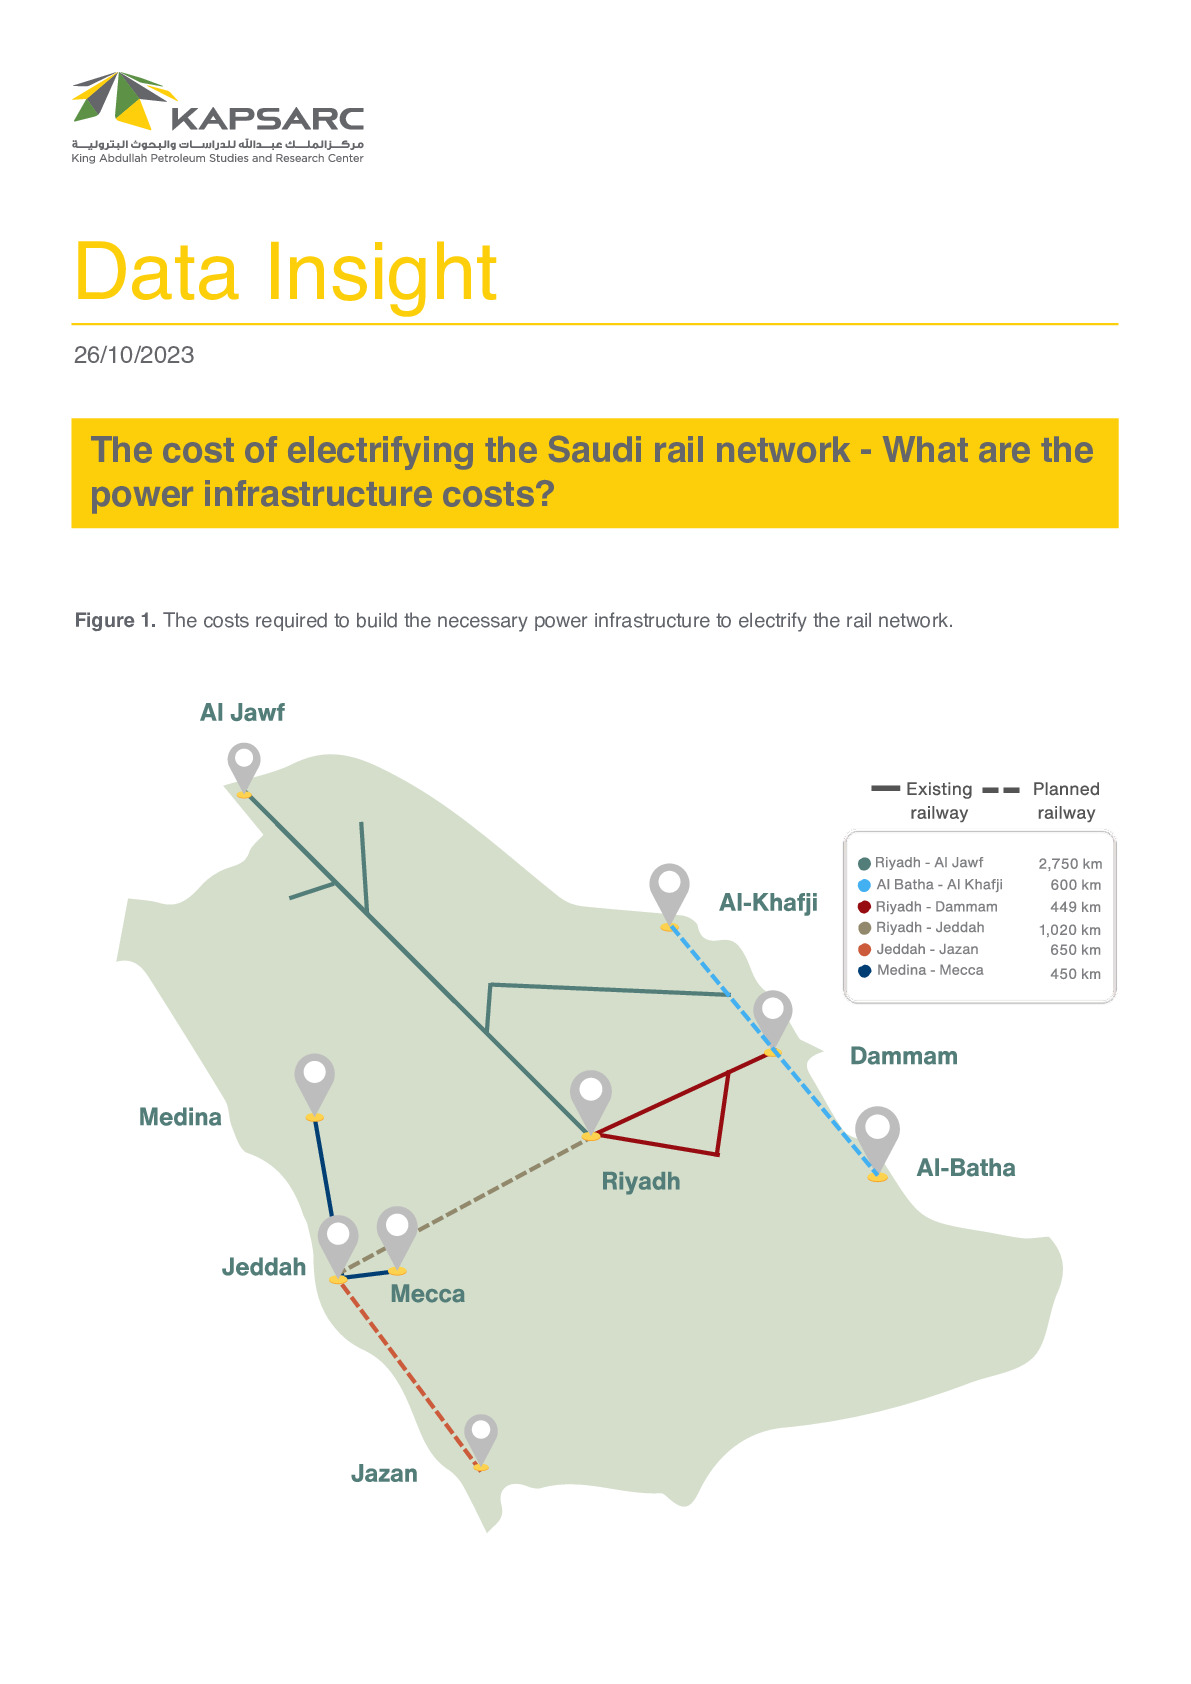 The Cost of Electrifying the Saudi Rail Network – What Are the Power Infrastructure Costs?